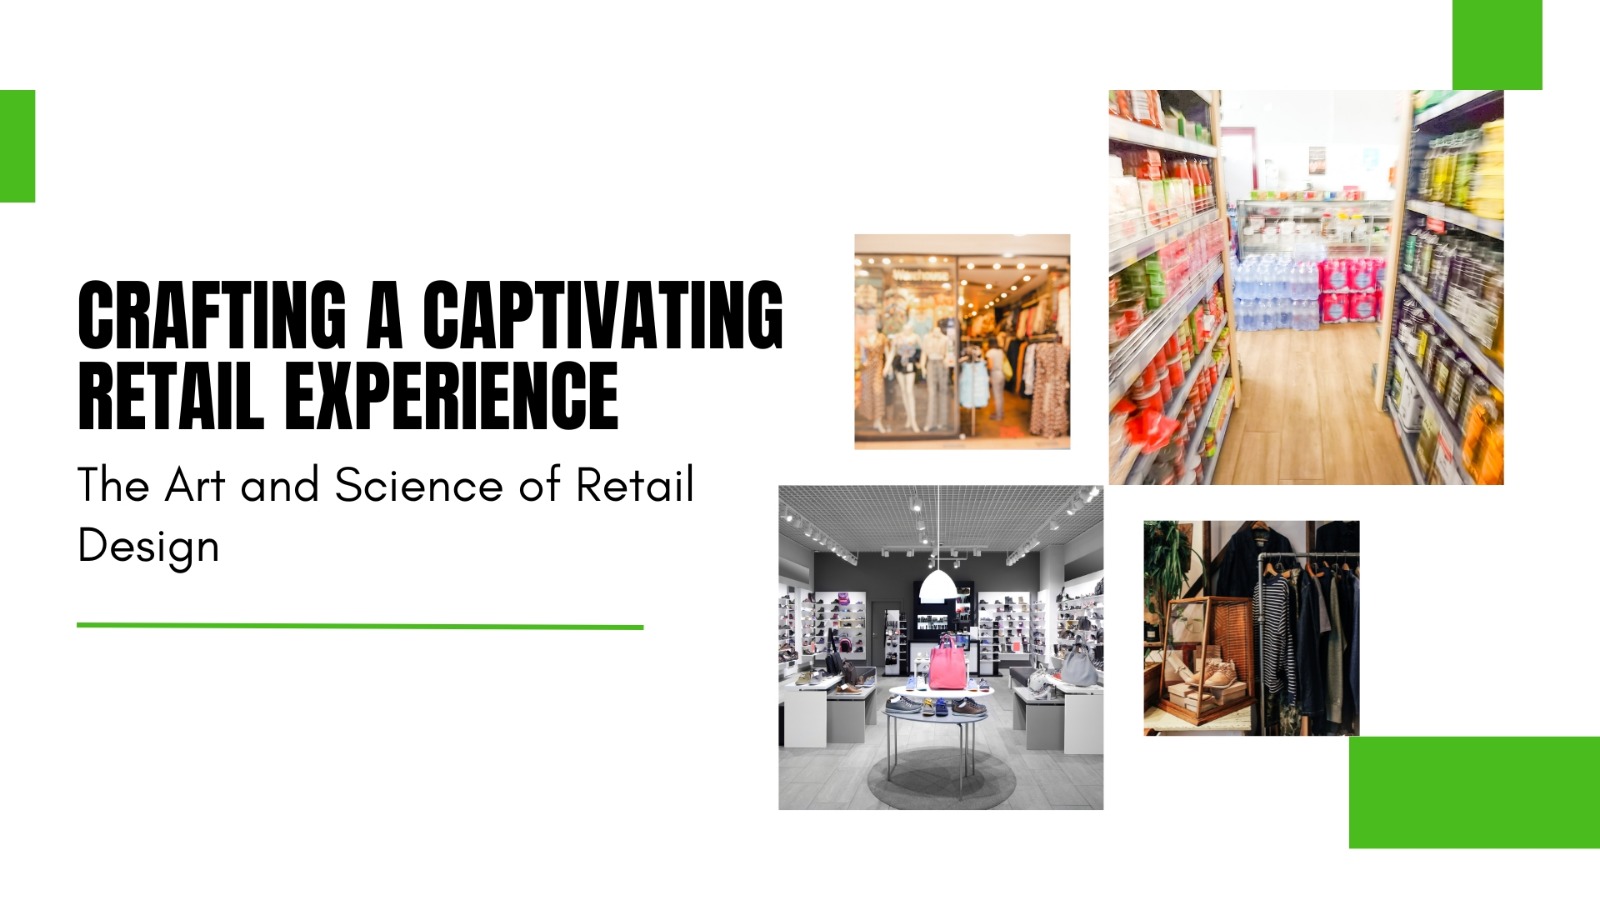 Crafting a Captivating Retail Experience: The Art and Science of Retail Design